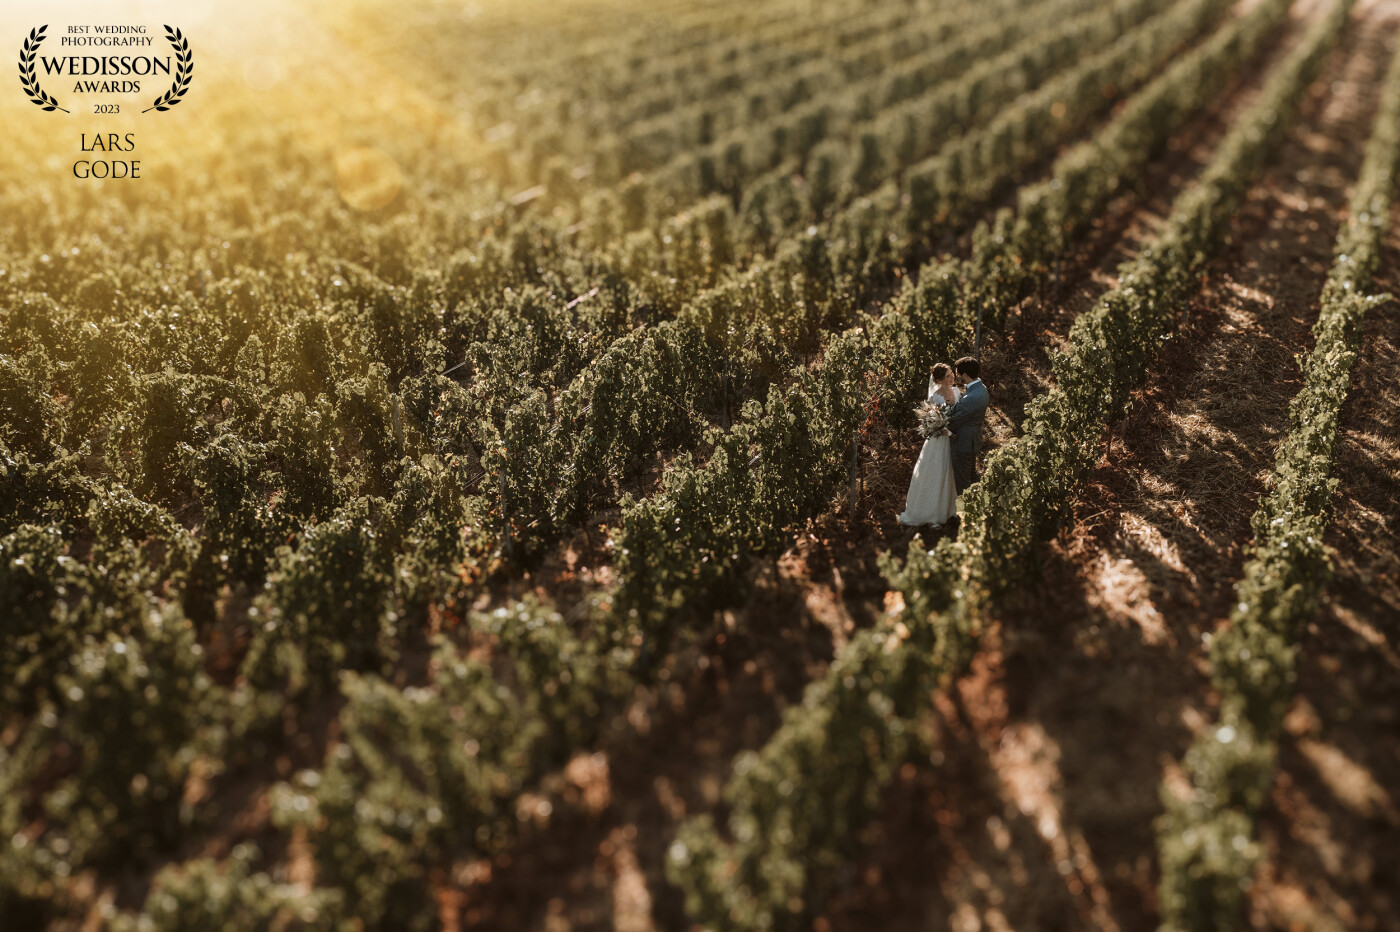 In the vineyards of southern Germany in the evening sun, this beautiful photo was taken with a drone.